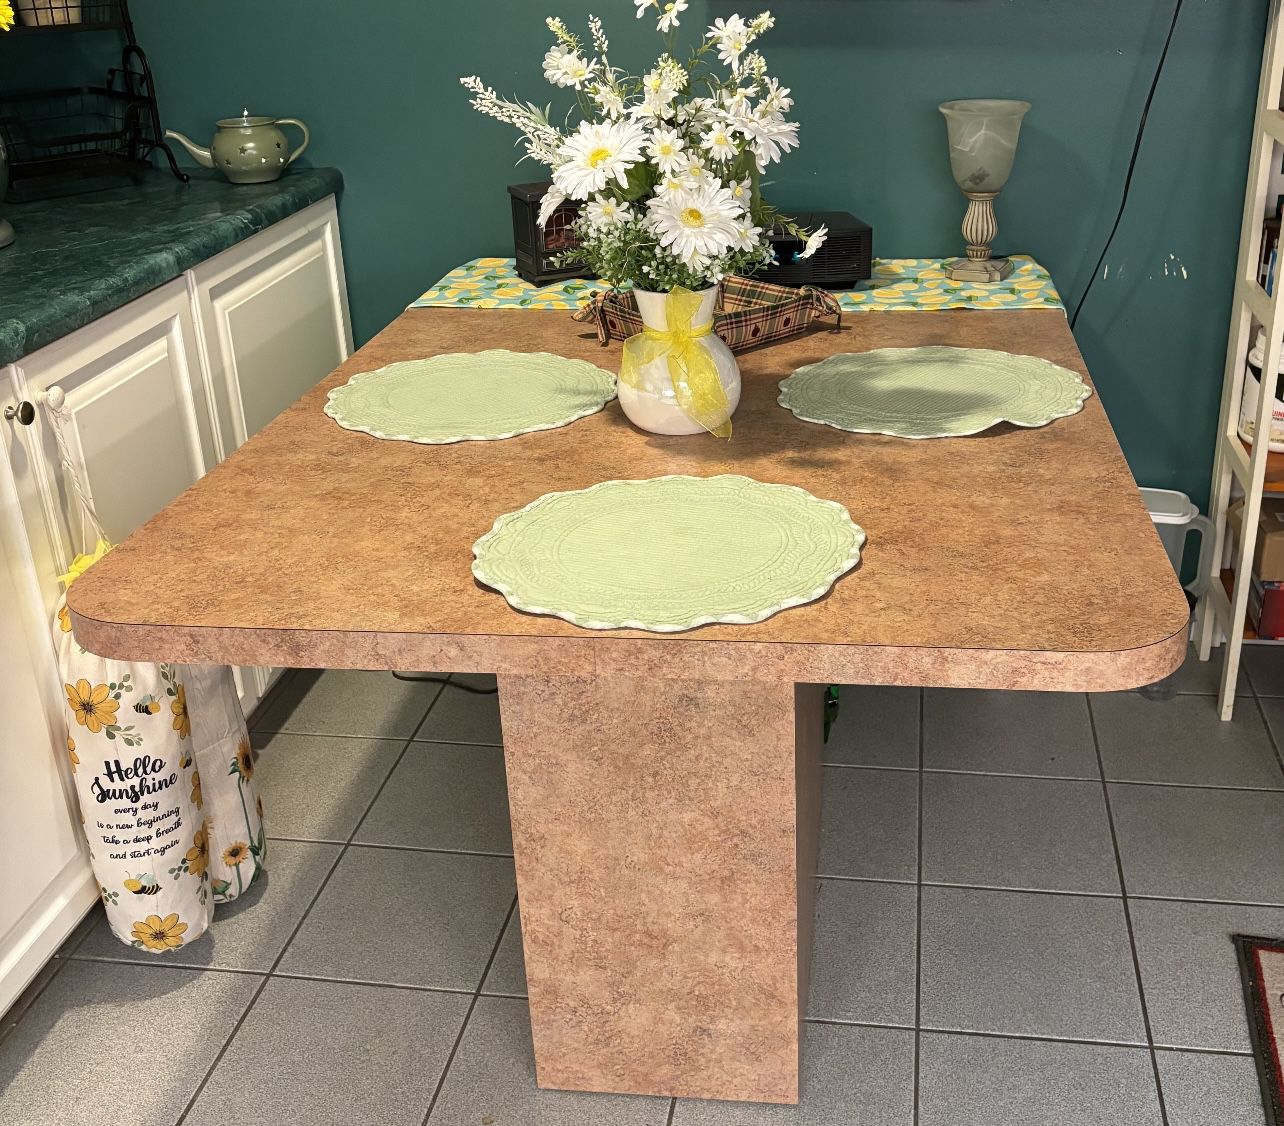 Kitchen table. Measurenents 60x24 Formica table. Beige 